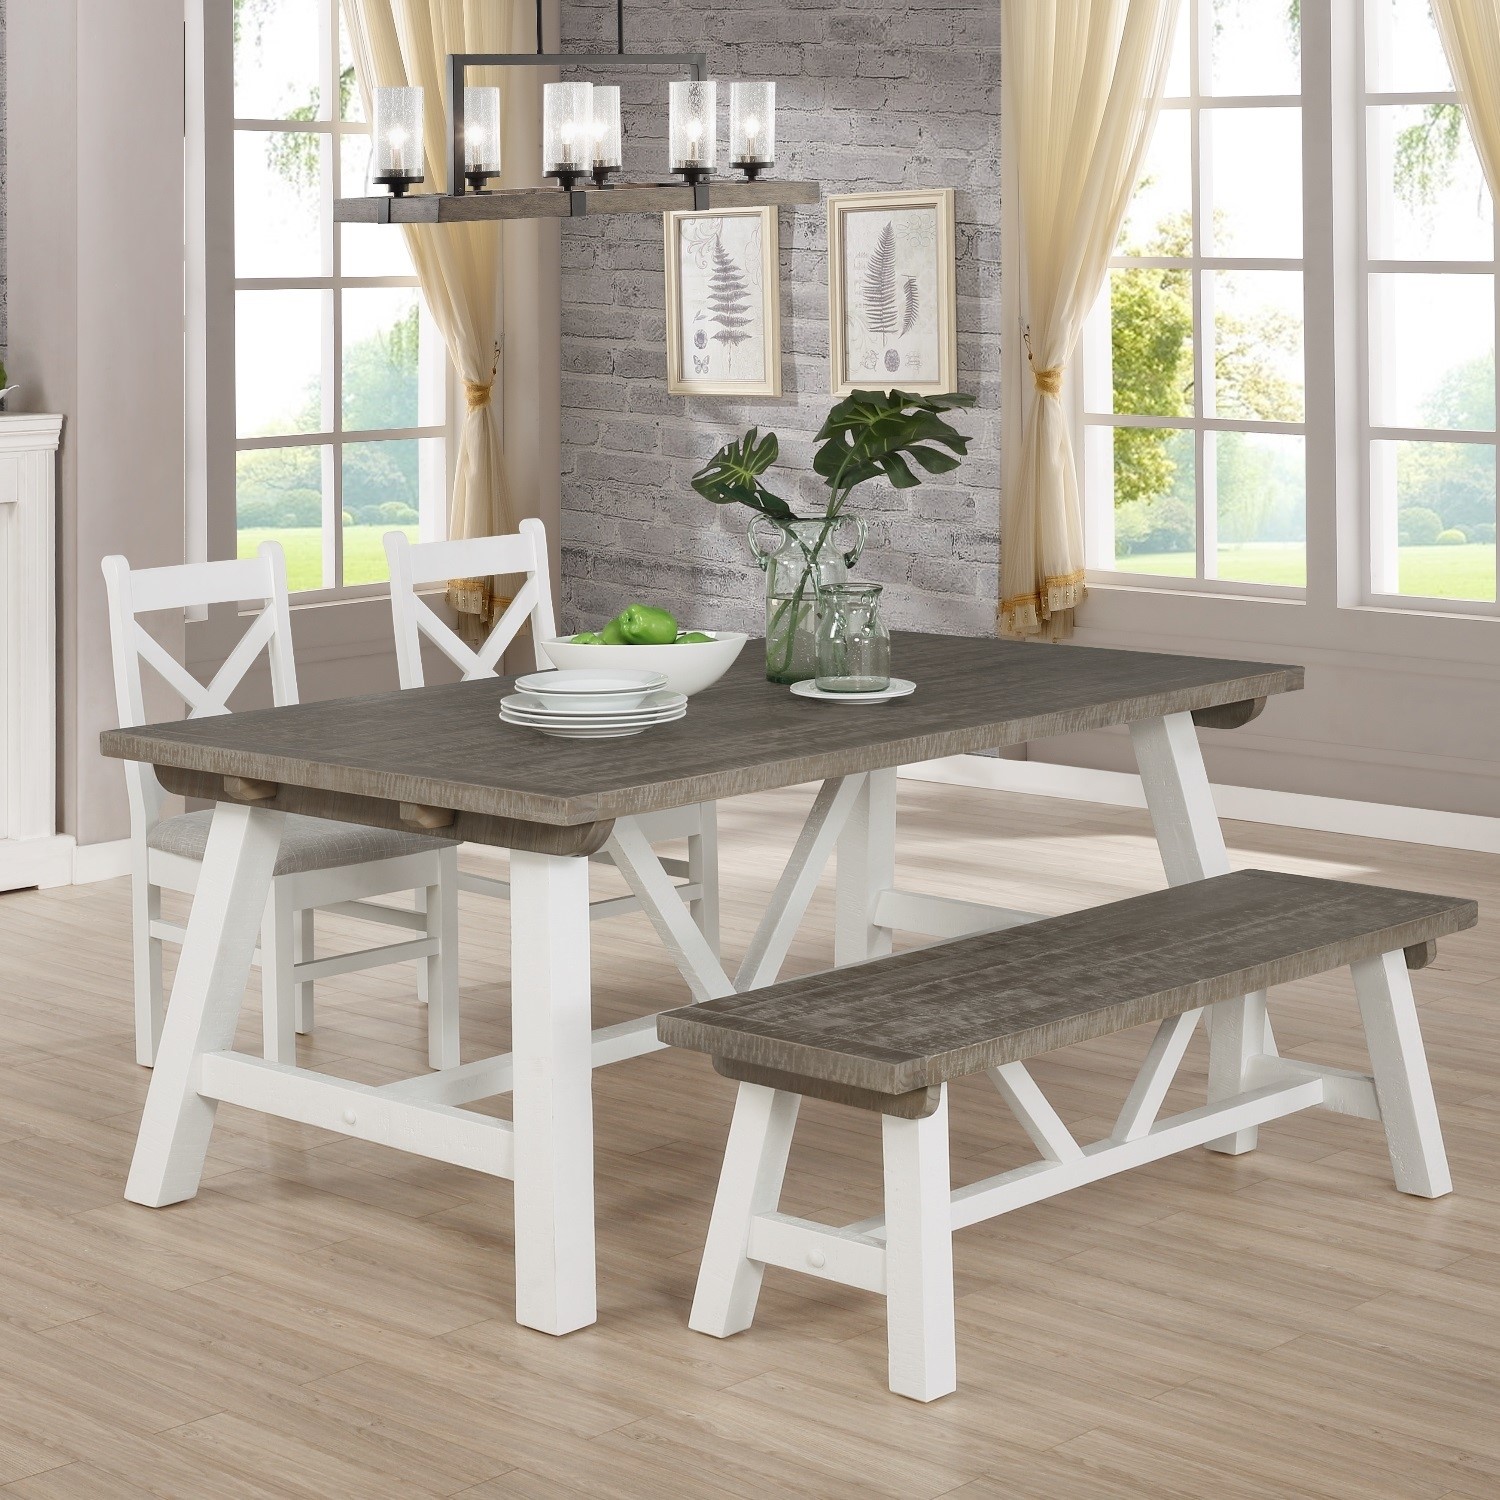 Extendable Wood Dining Table In White, Grey Wash Wood Dining Chairs